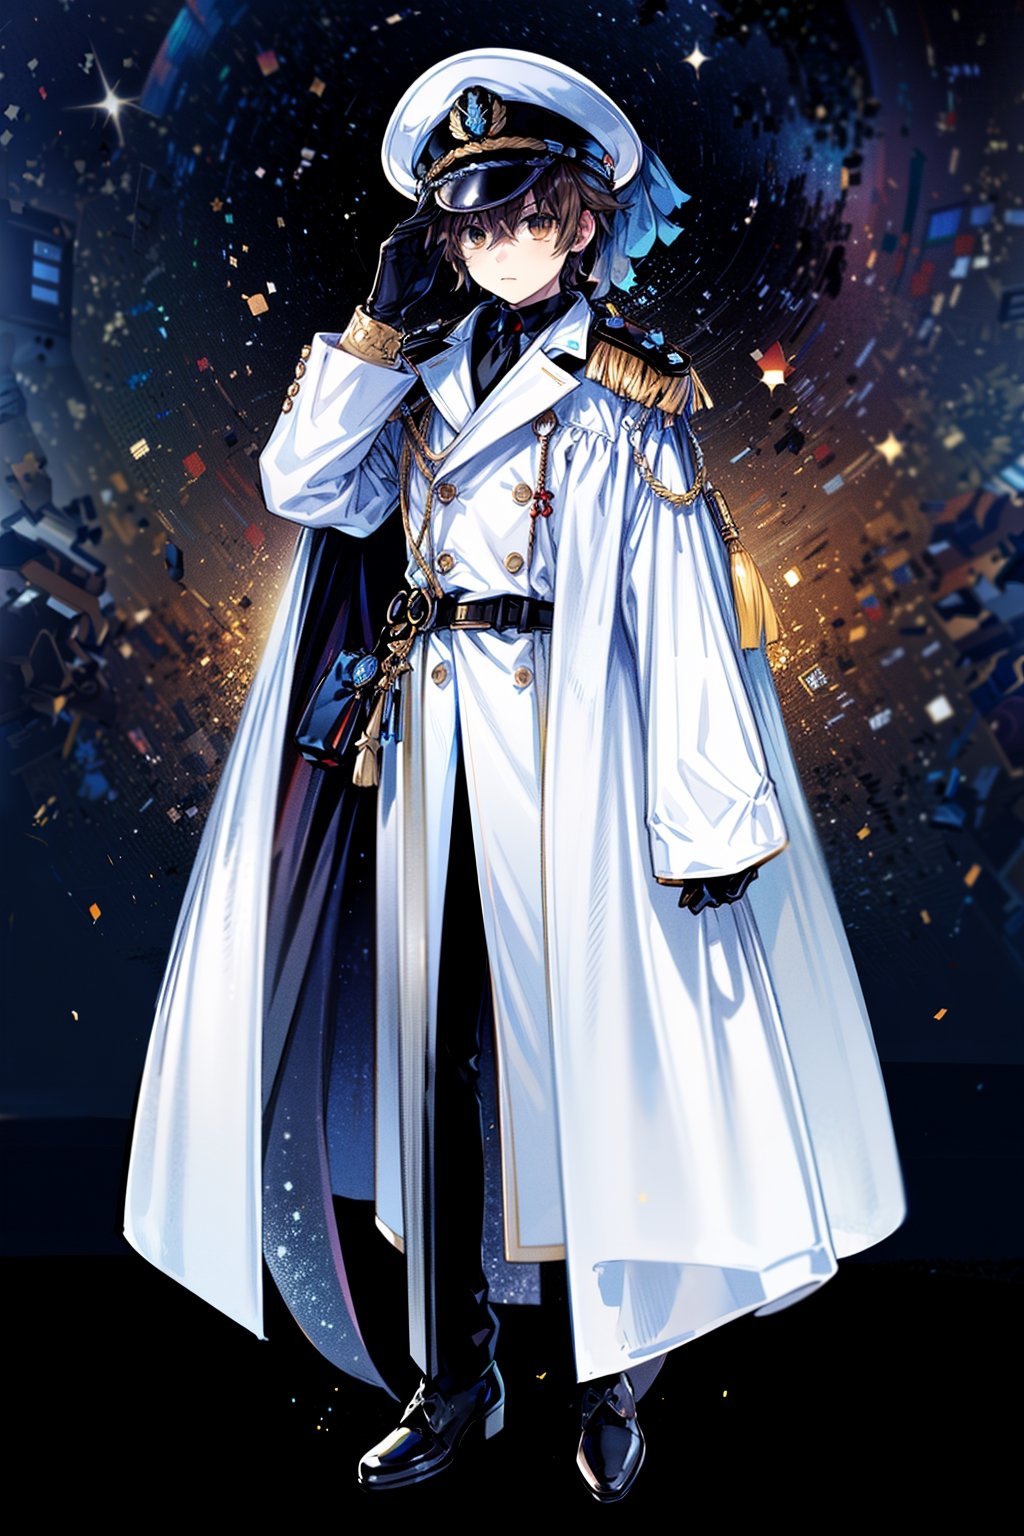 Hight Detailed, Hight Quality, Masterpiece,Beatifull,(Mediun long short),1boy,Adjusting gloves,adjusting gloves, twenty year old young man, brown hair with irregular fragment of white in the hair, brown amber eye color, tall, white Japanese military uniform, wears glasses, white captain's naval hat, white open trench coat, black belt, black shoes, space command center, detailed,background in outer space,